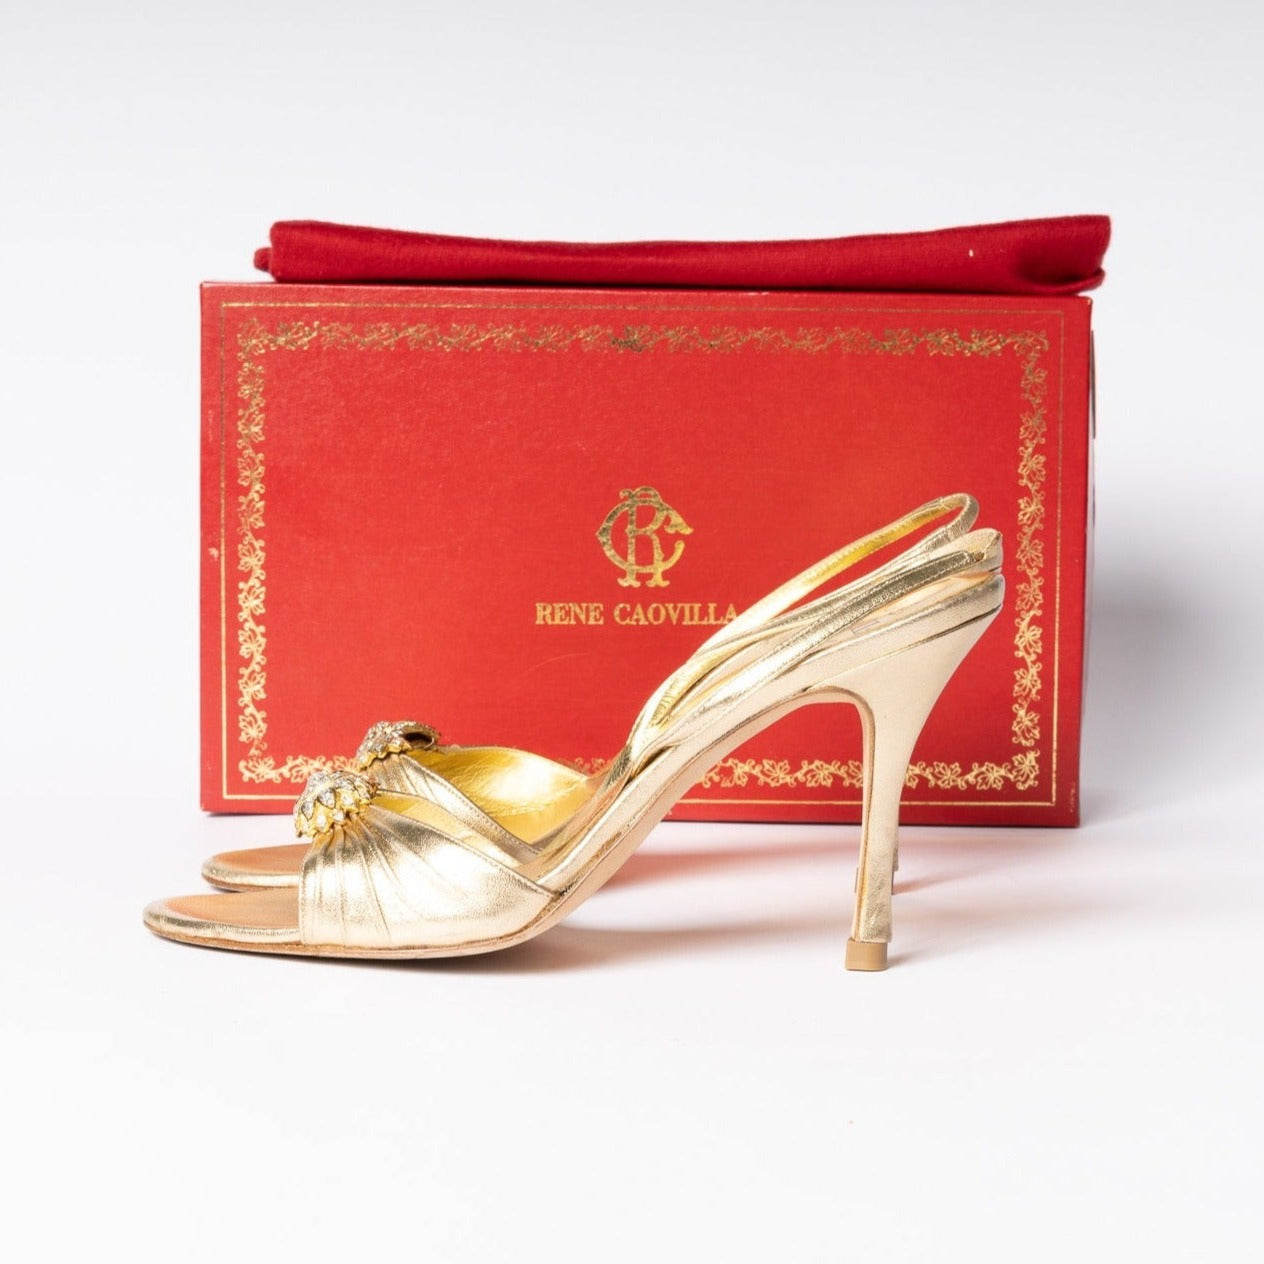 Rene Caovilla Gold Heels - Radiant glamour and timeless allure in a pair of stunning, statement-making shoes.